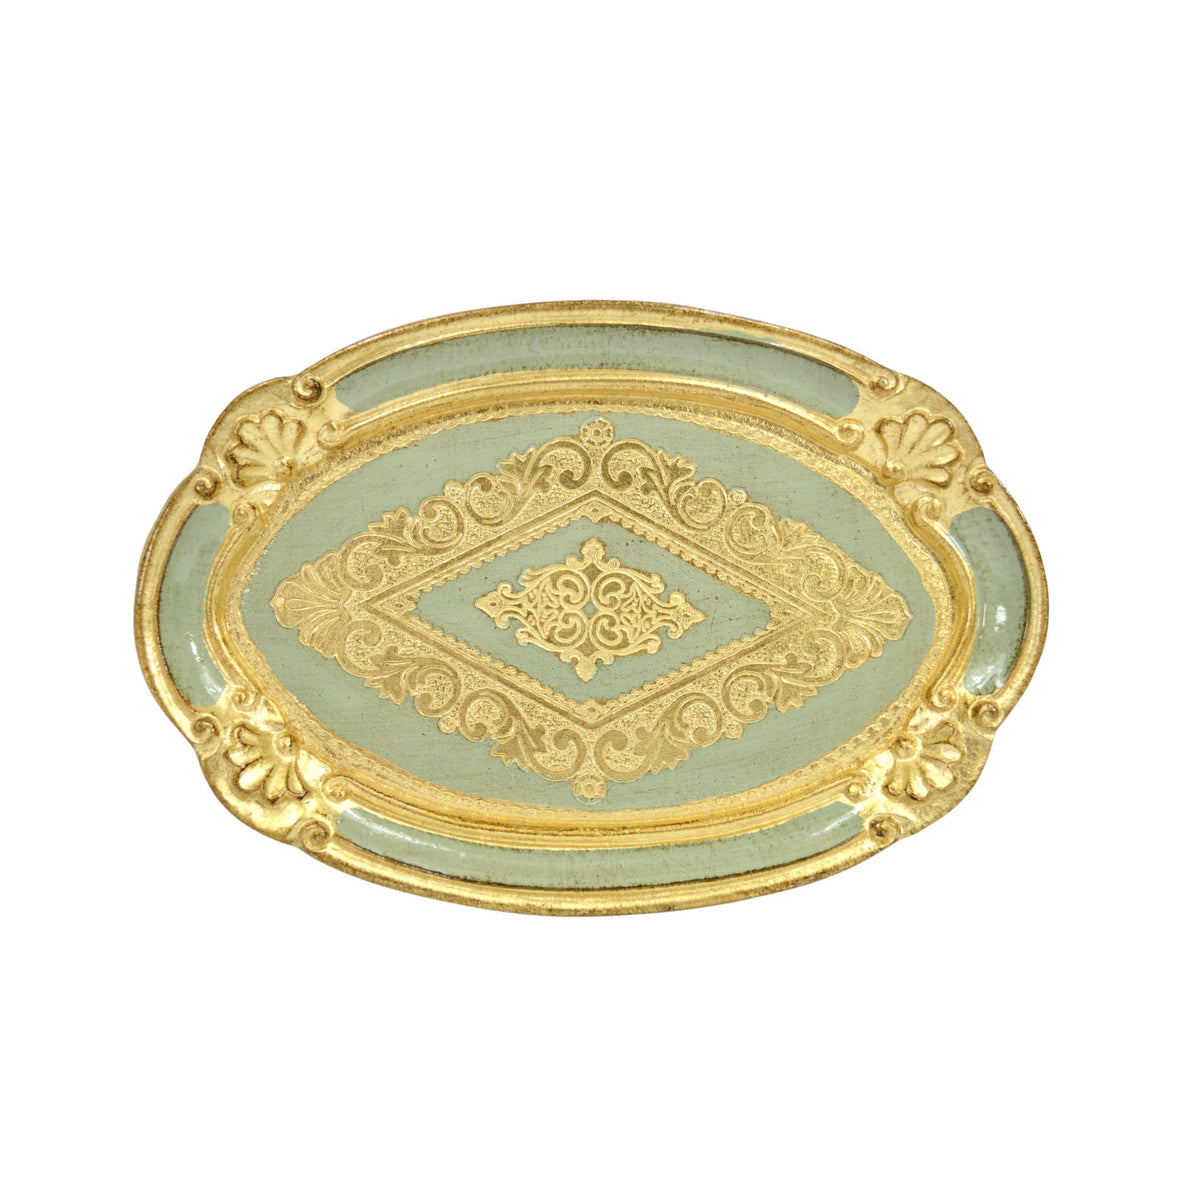 Florentine Carved Wood Oval Mini Tray, Made in Italy - My Italian Decor